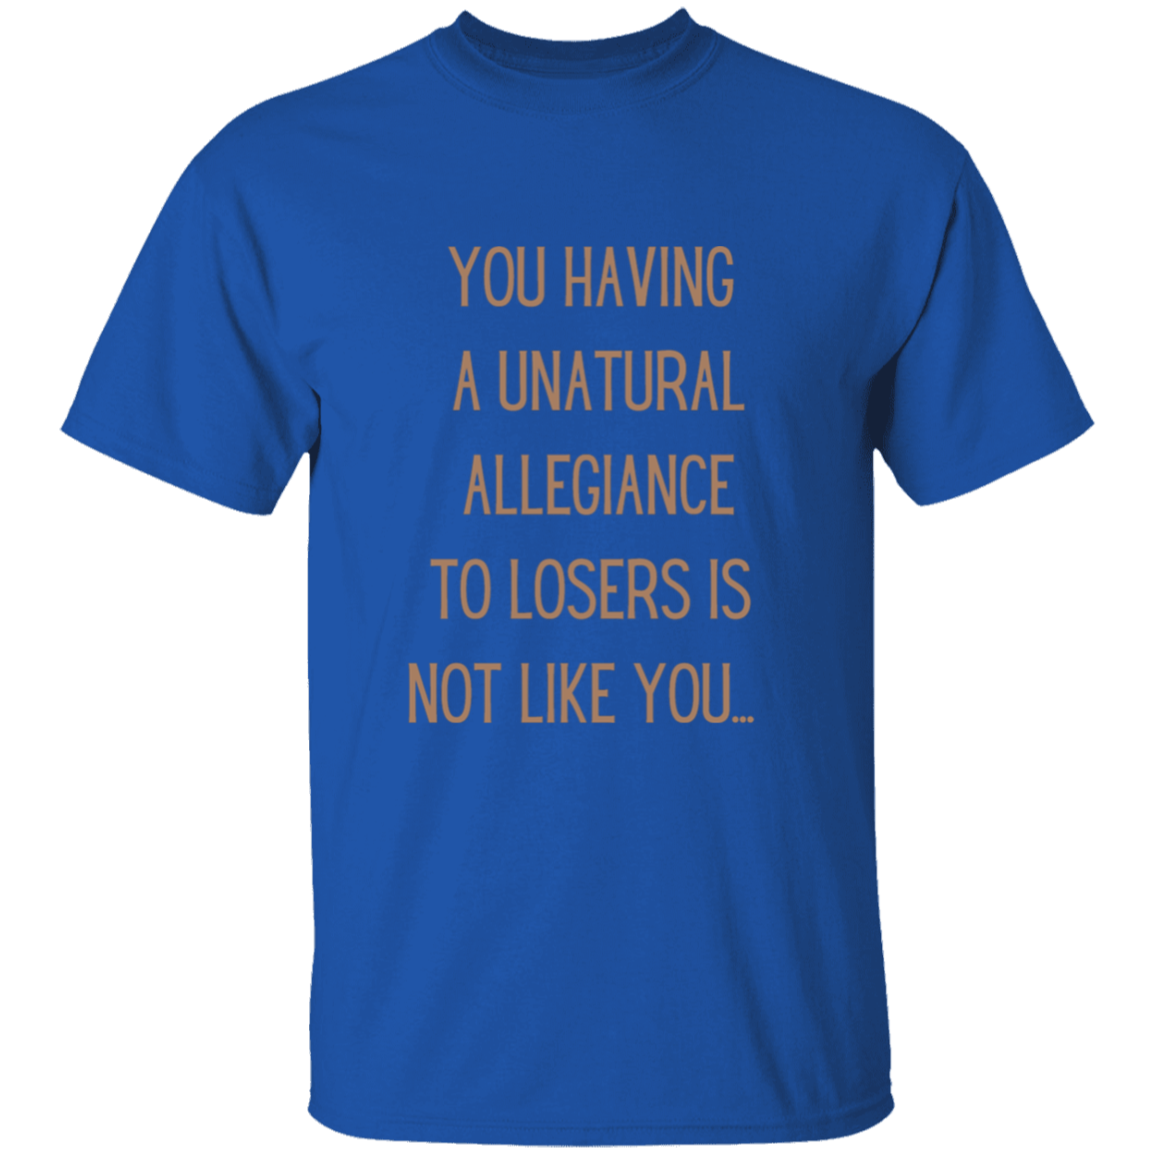 Katt said it best: You having a unatural allegiance to losers is not like you…  T-Shirt